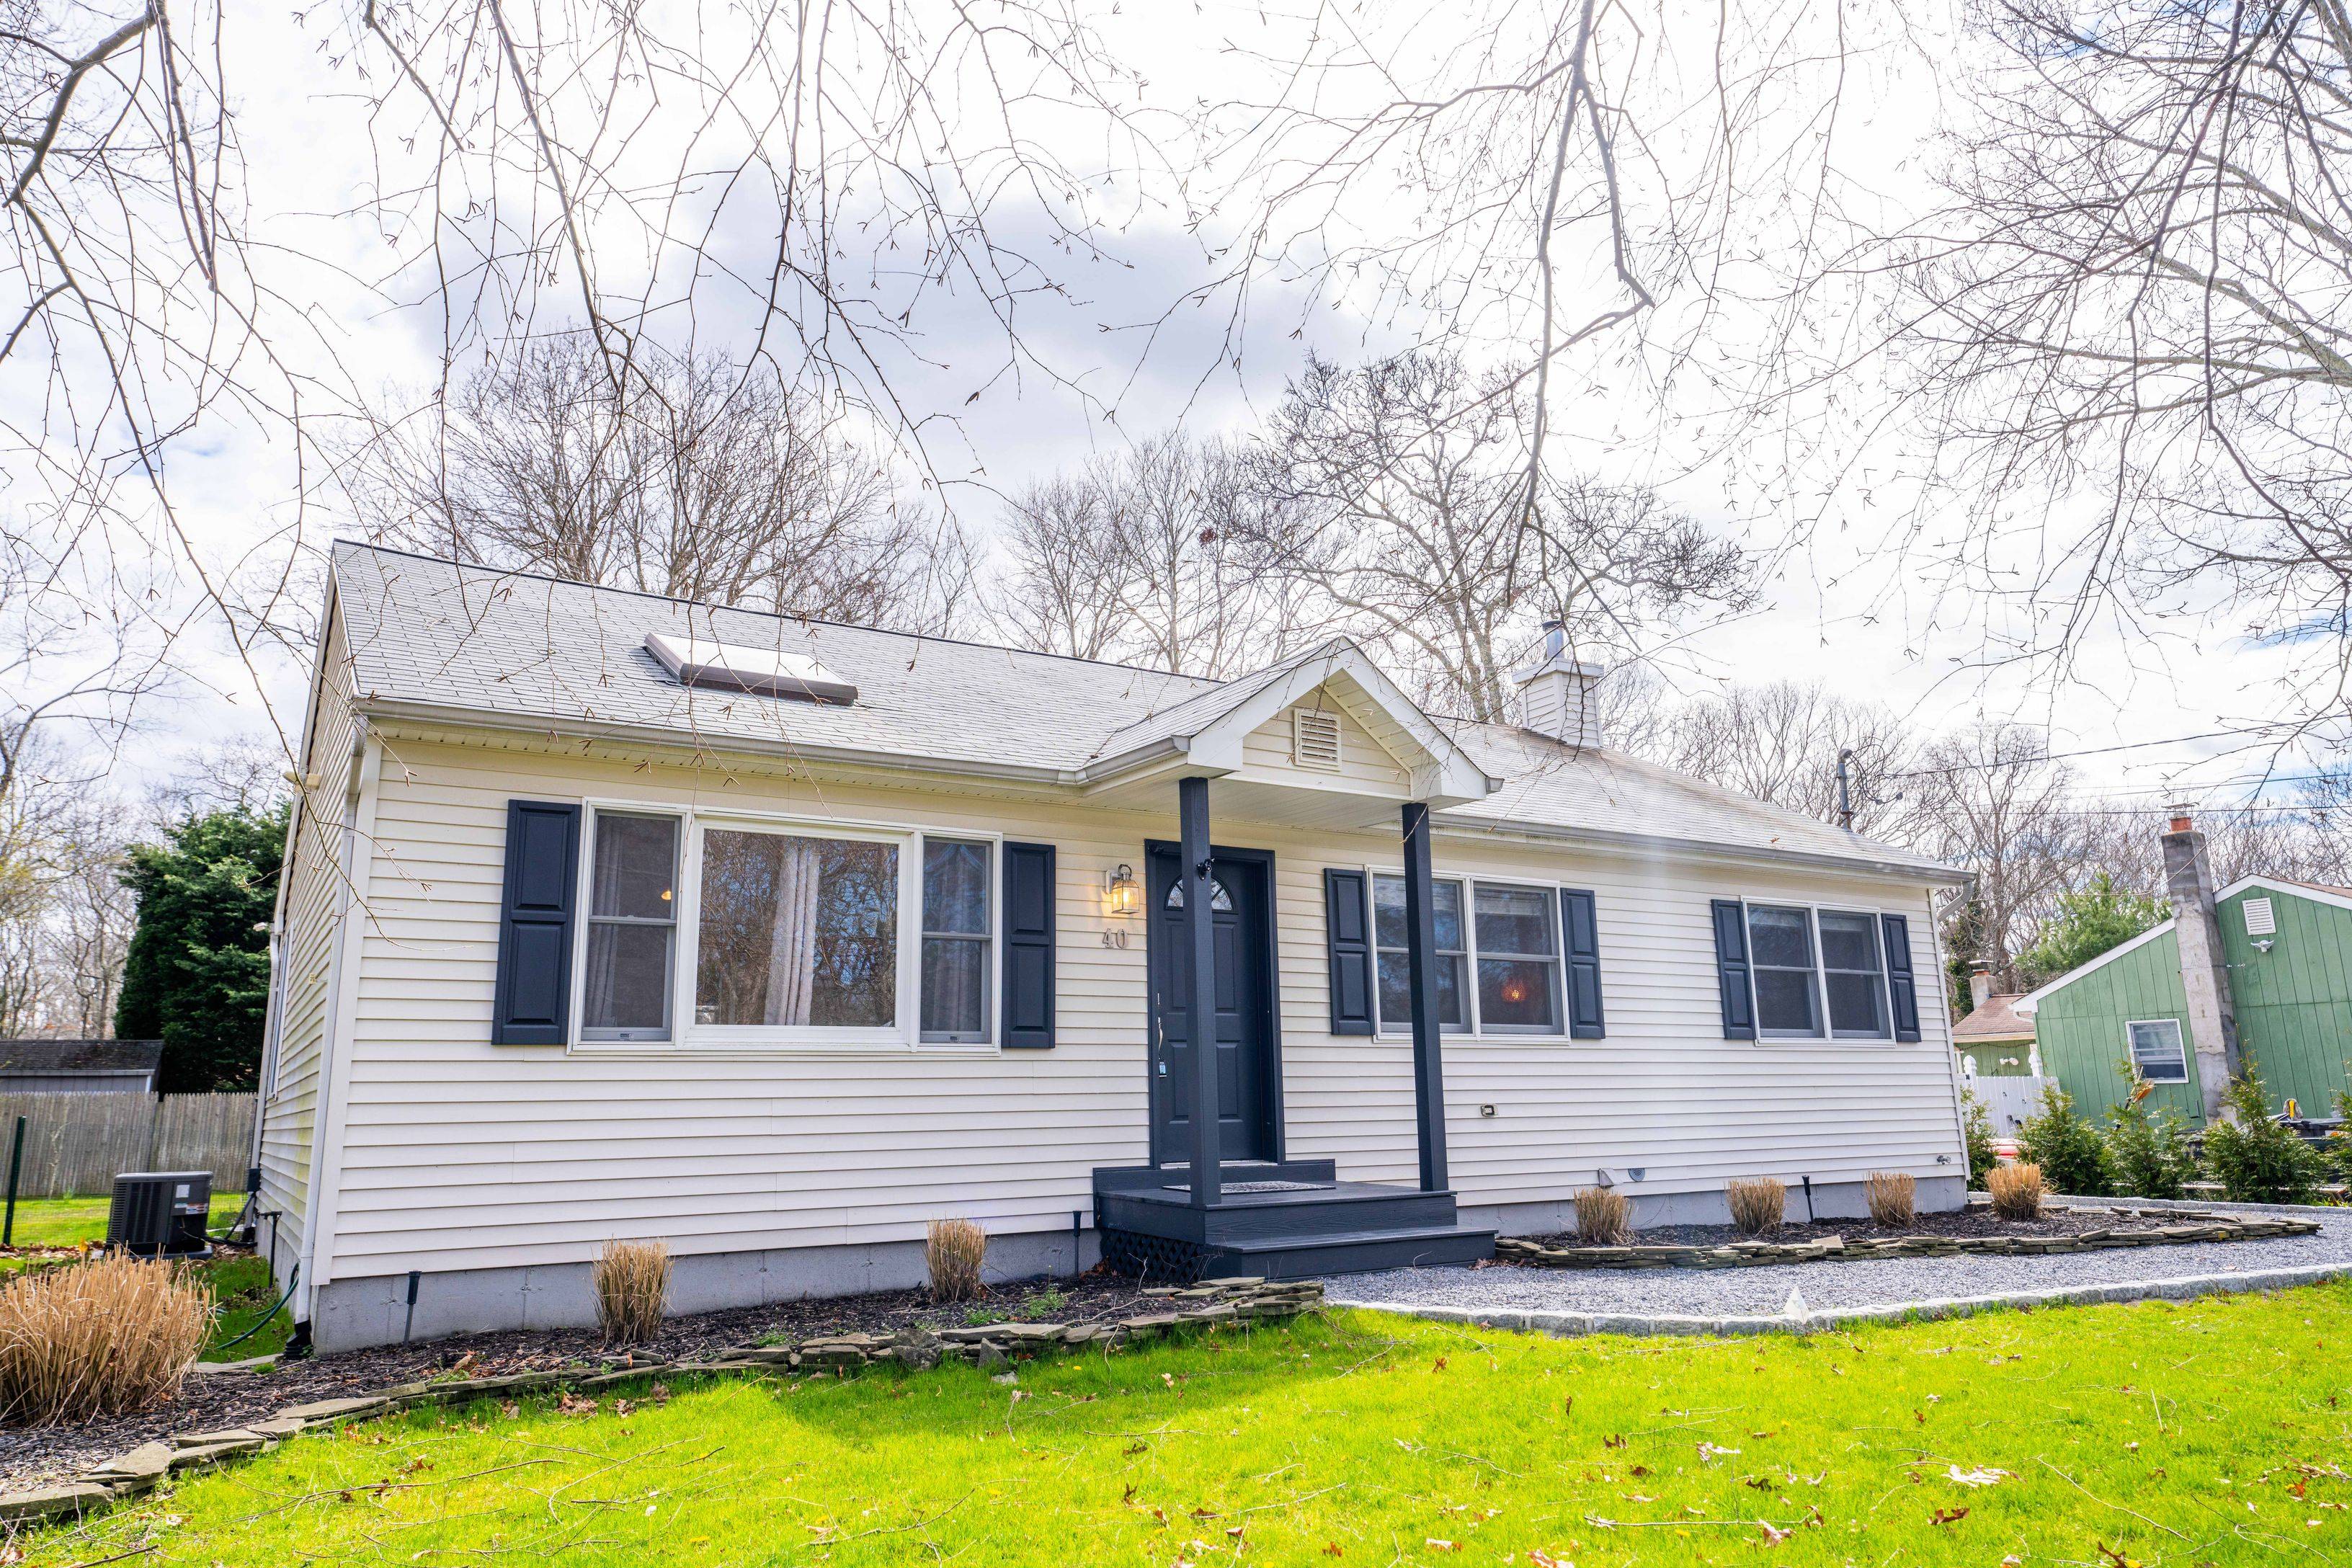 NEWLY RENOVATED HOME IN HAMPTON BAYS, CENTRAL TO ALL!